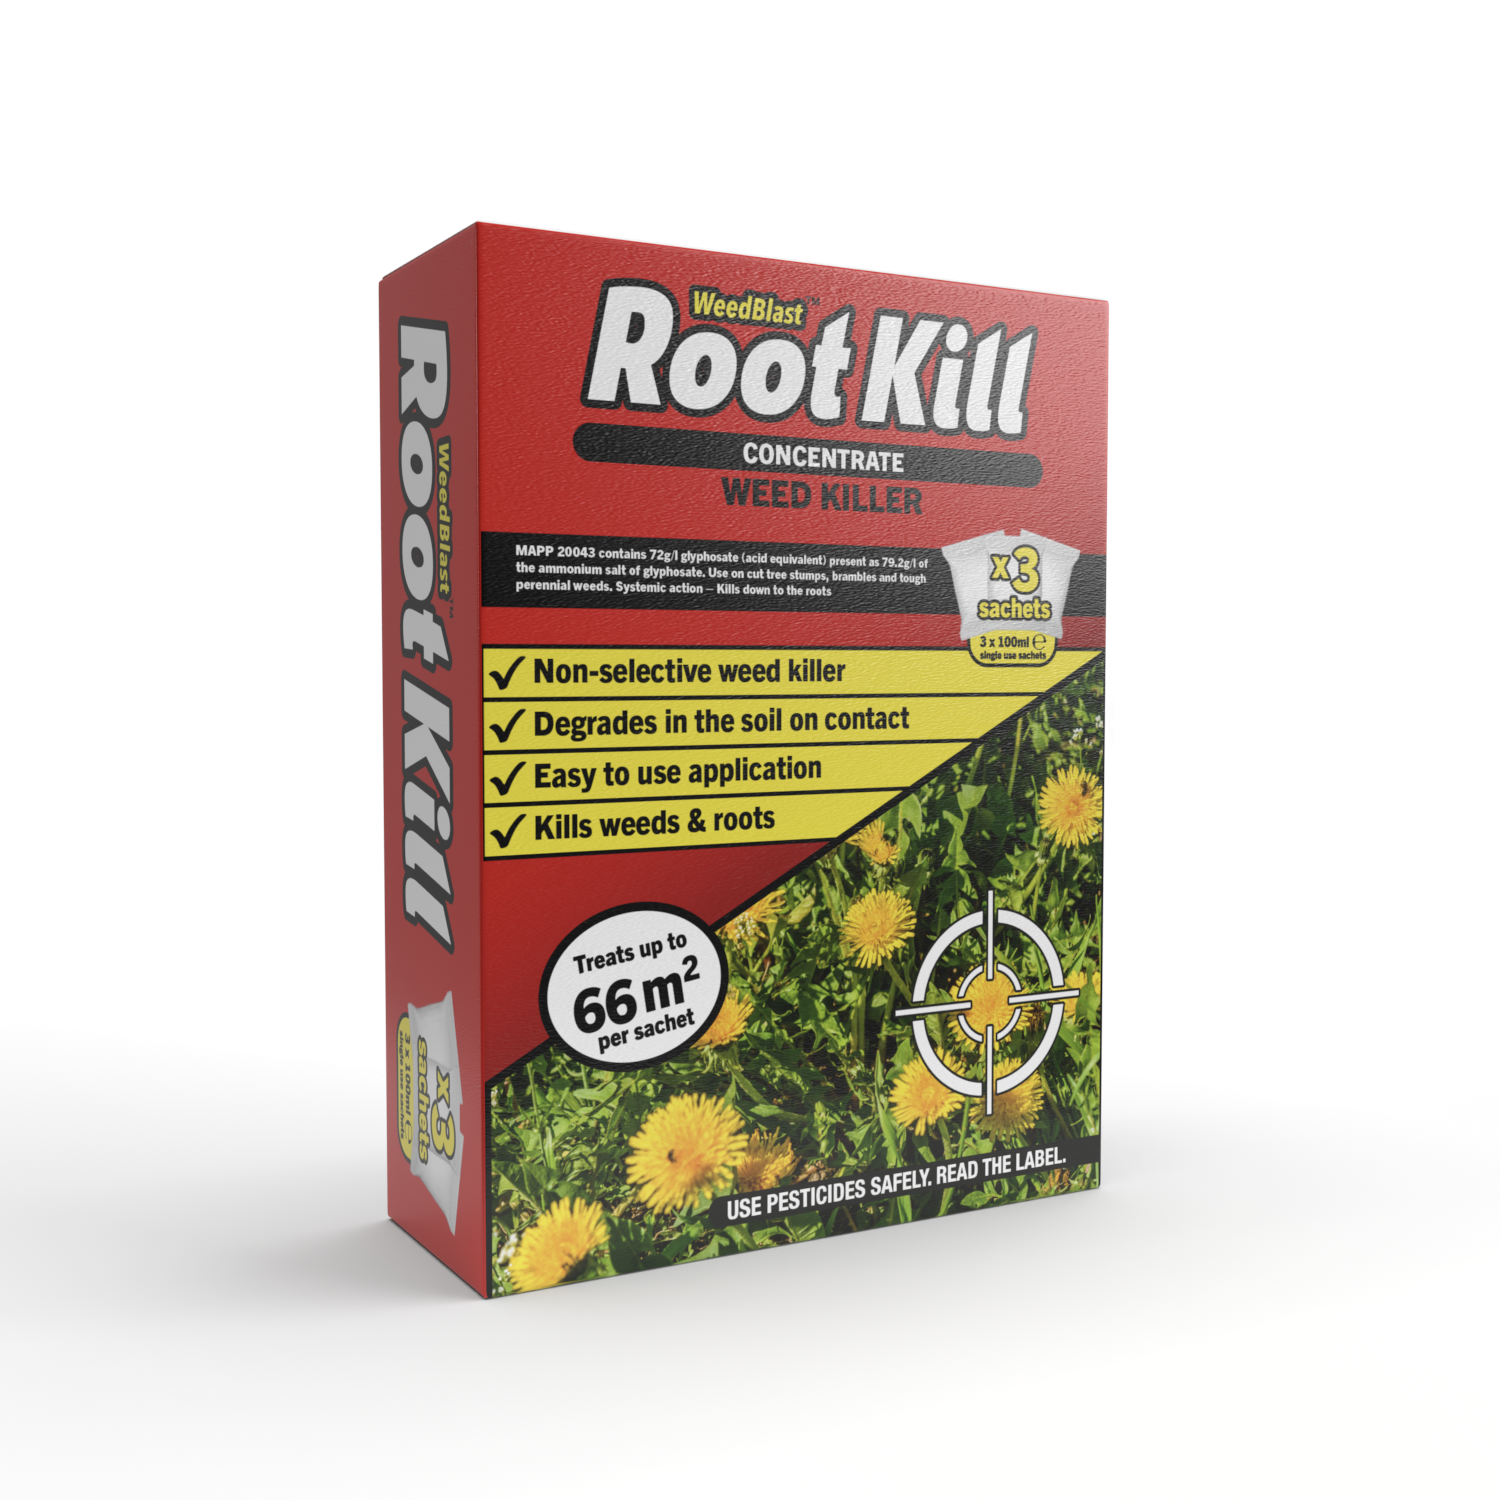 Weedblast Rootkill Concentrated Weedkiller 6 x 100 Sachets boxed